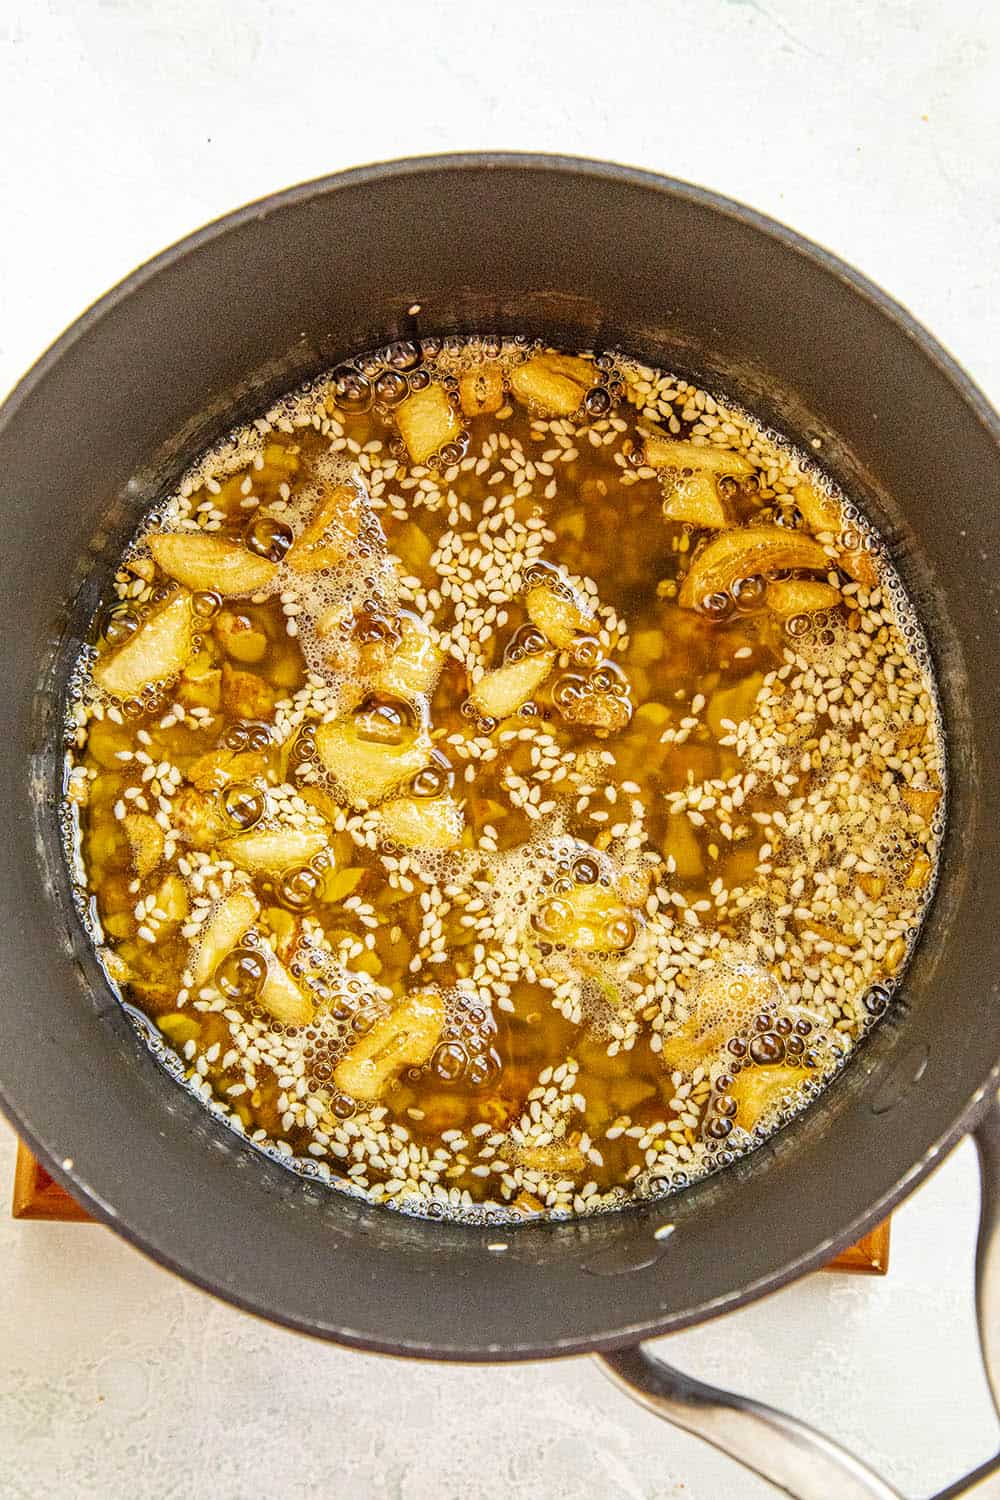 Cooking the nuts, sesame seeds and garlic cloves in the hot oil